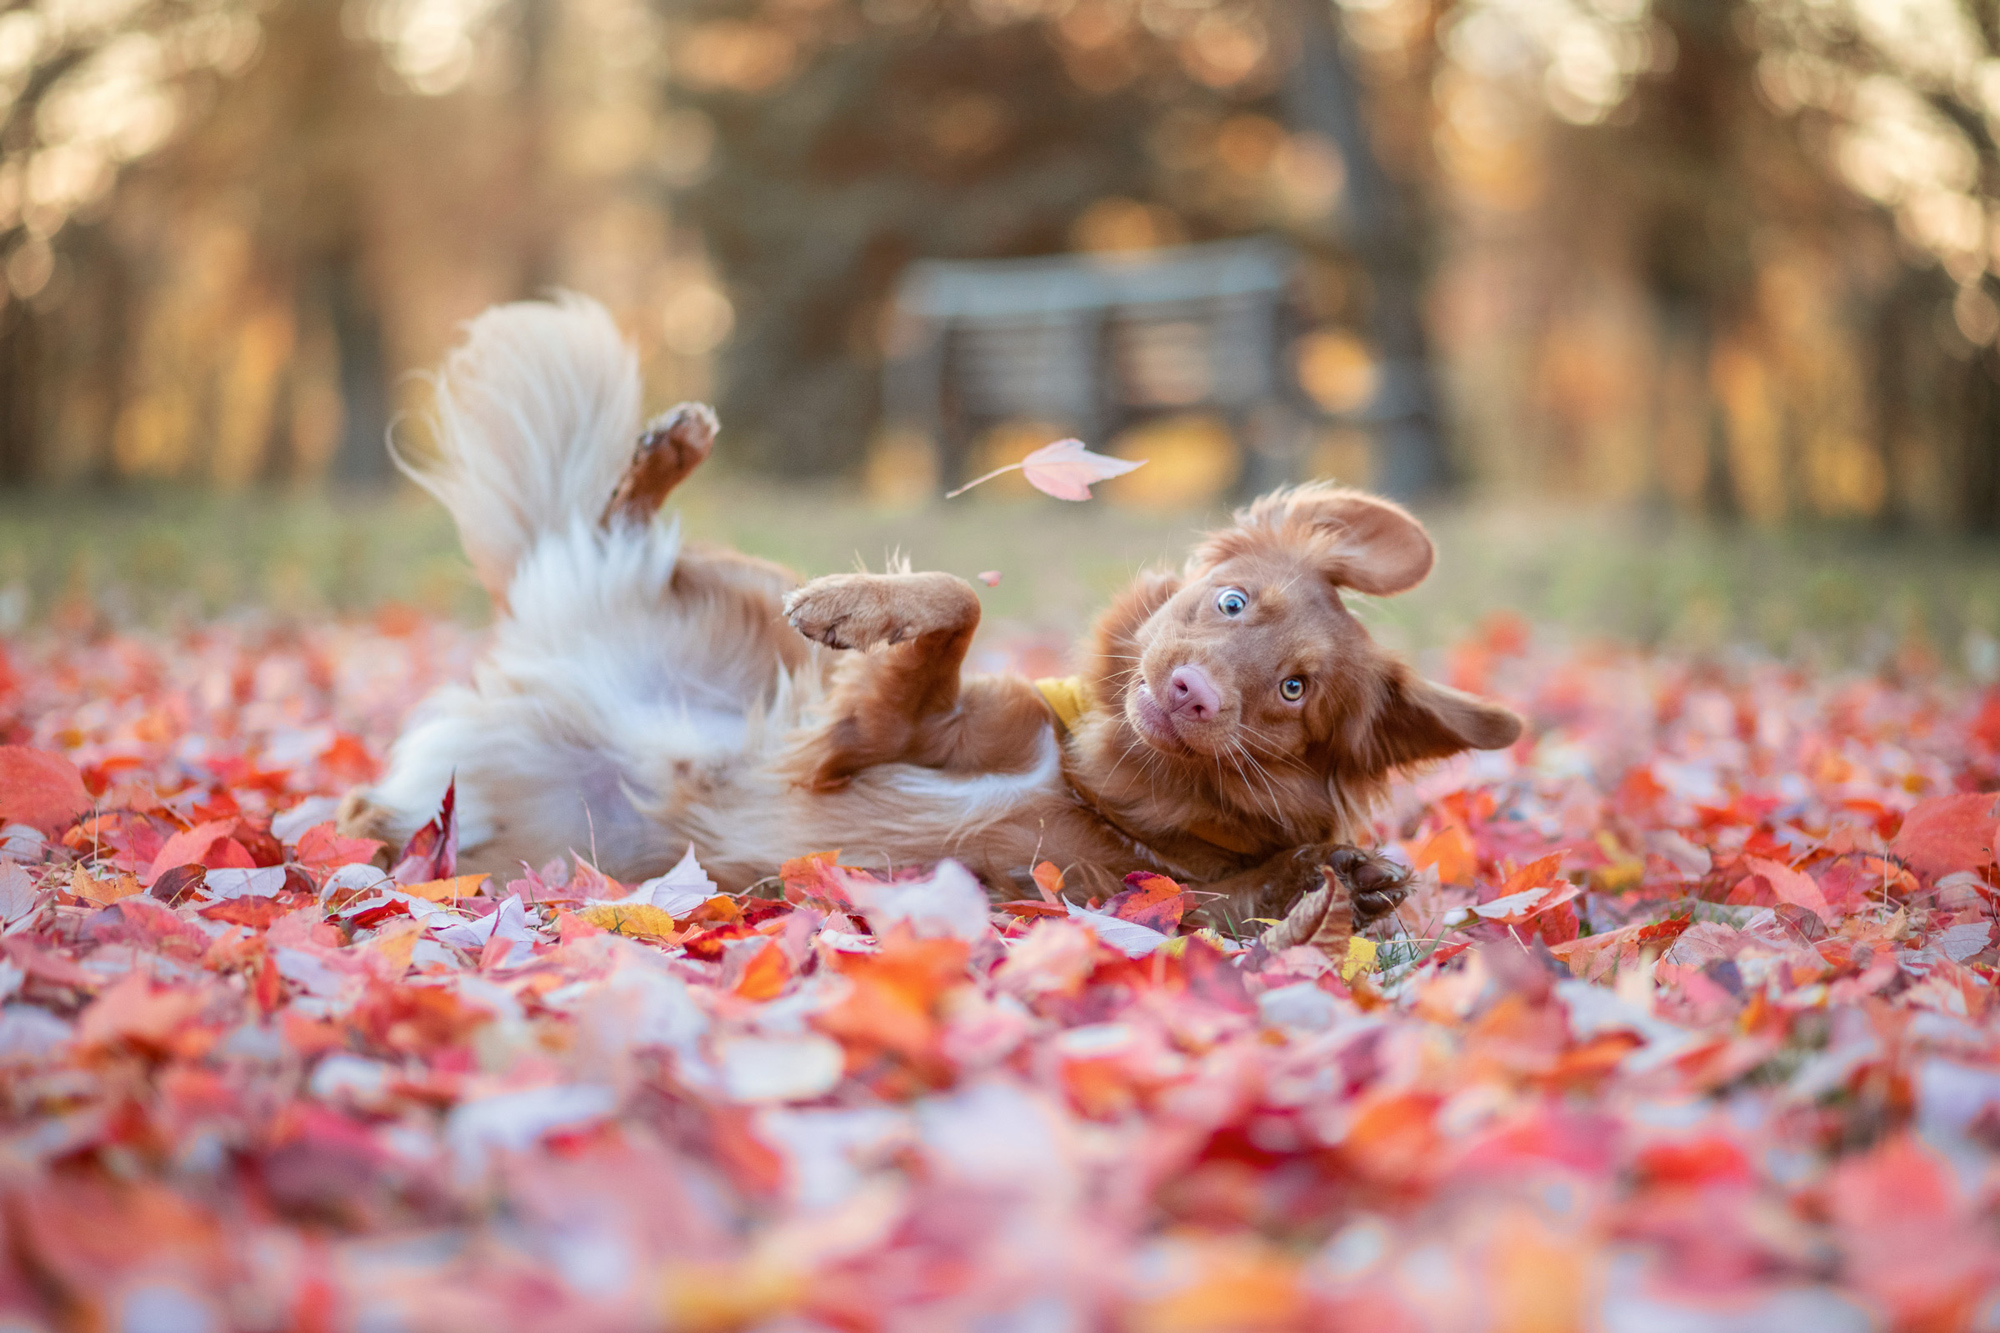 The Funny Pet Finalist photos will give you all the feels